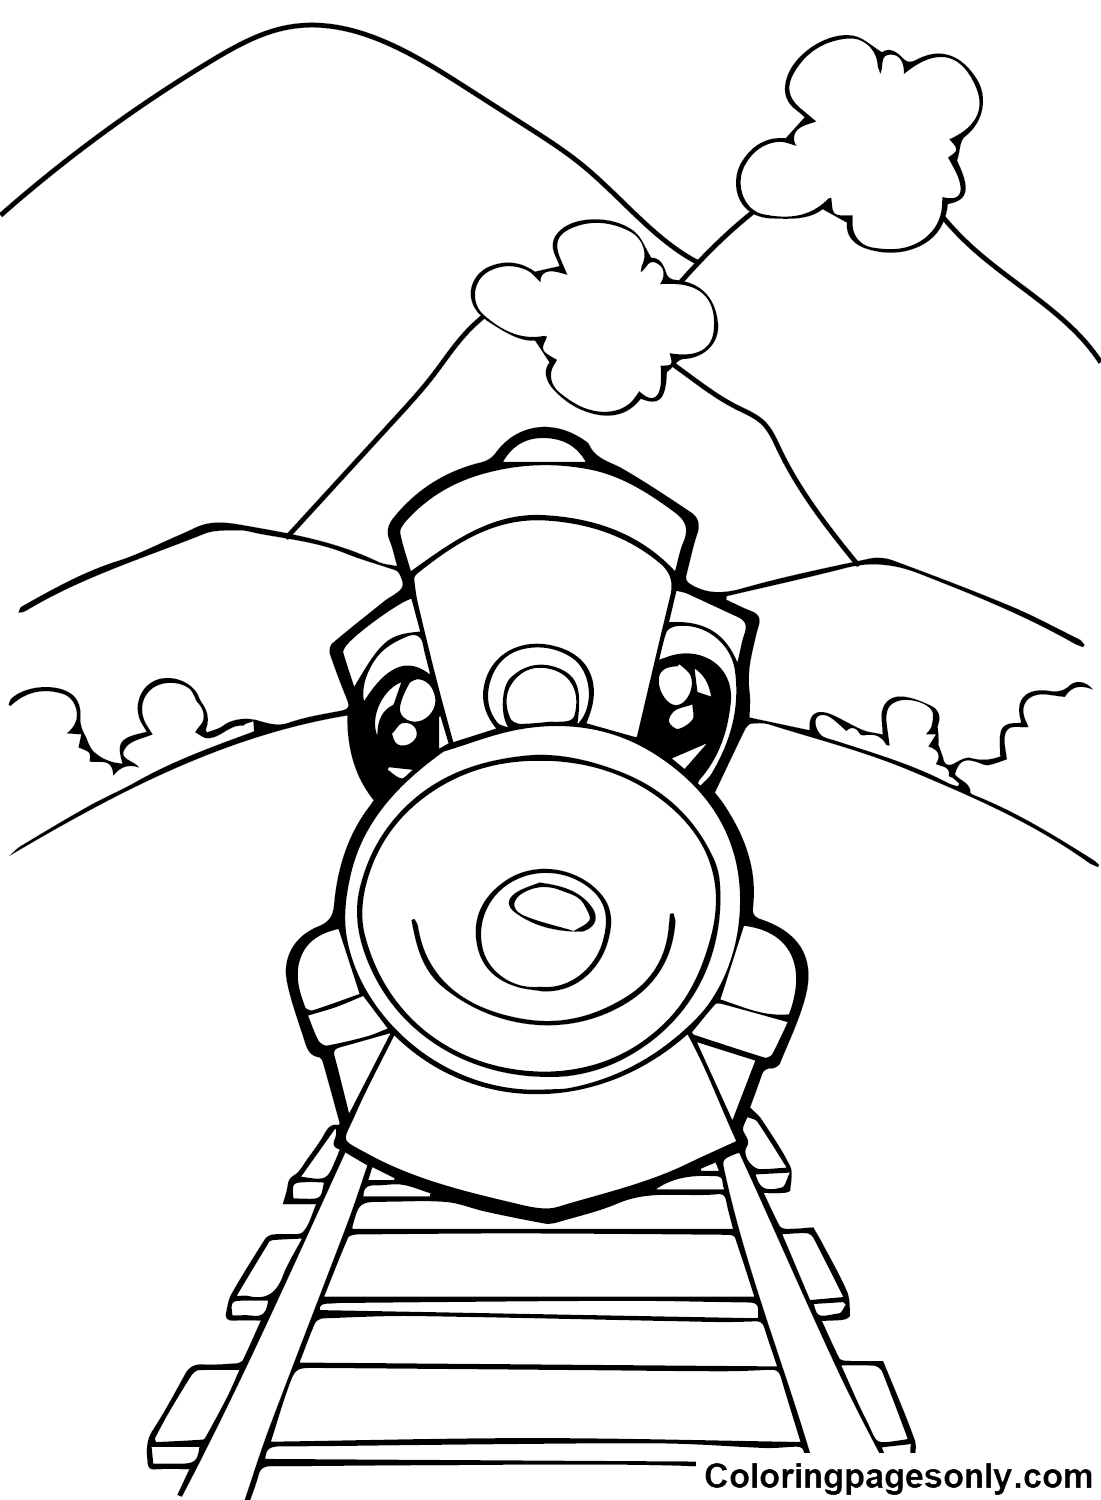 Train to Print Coloring Pages